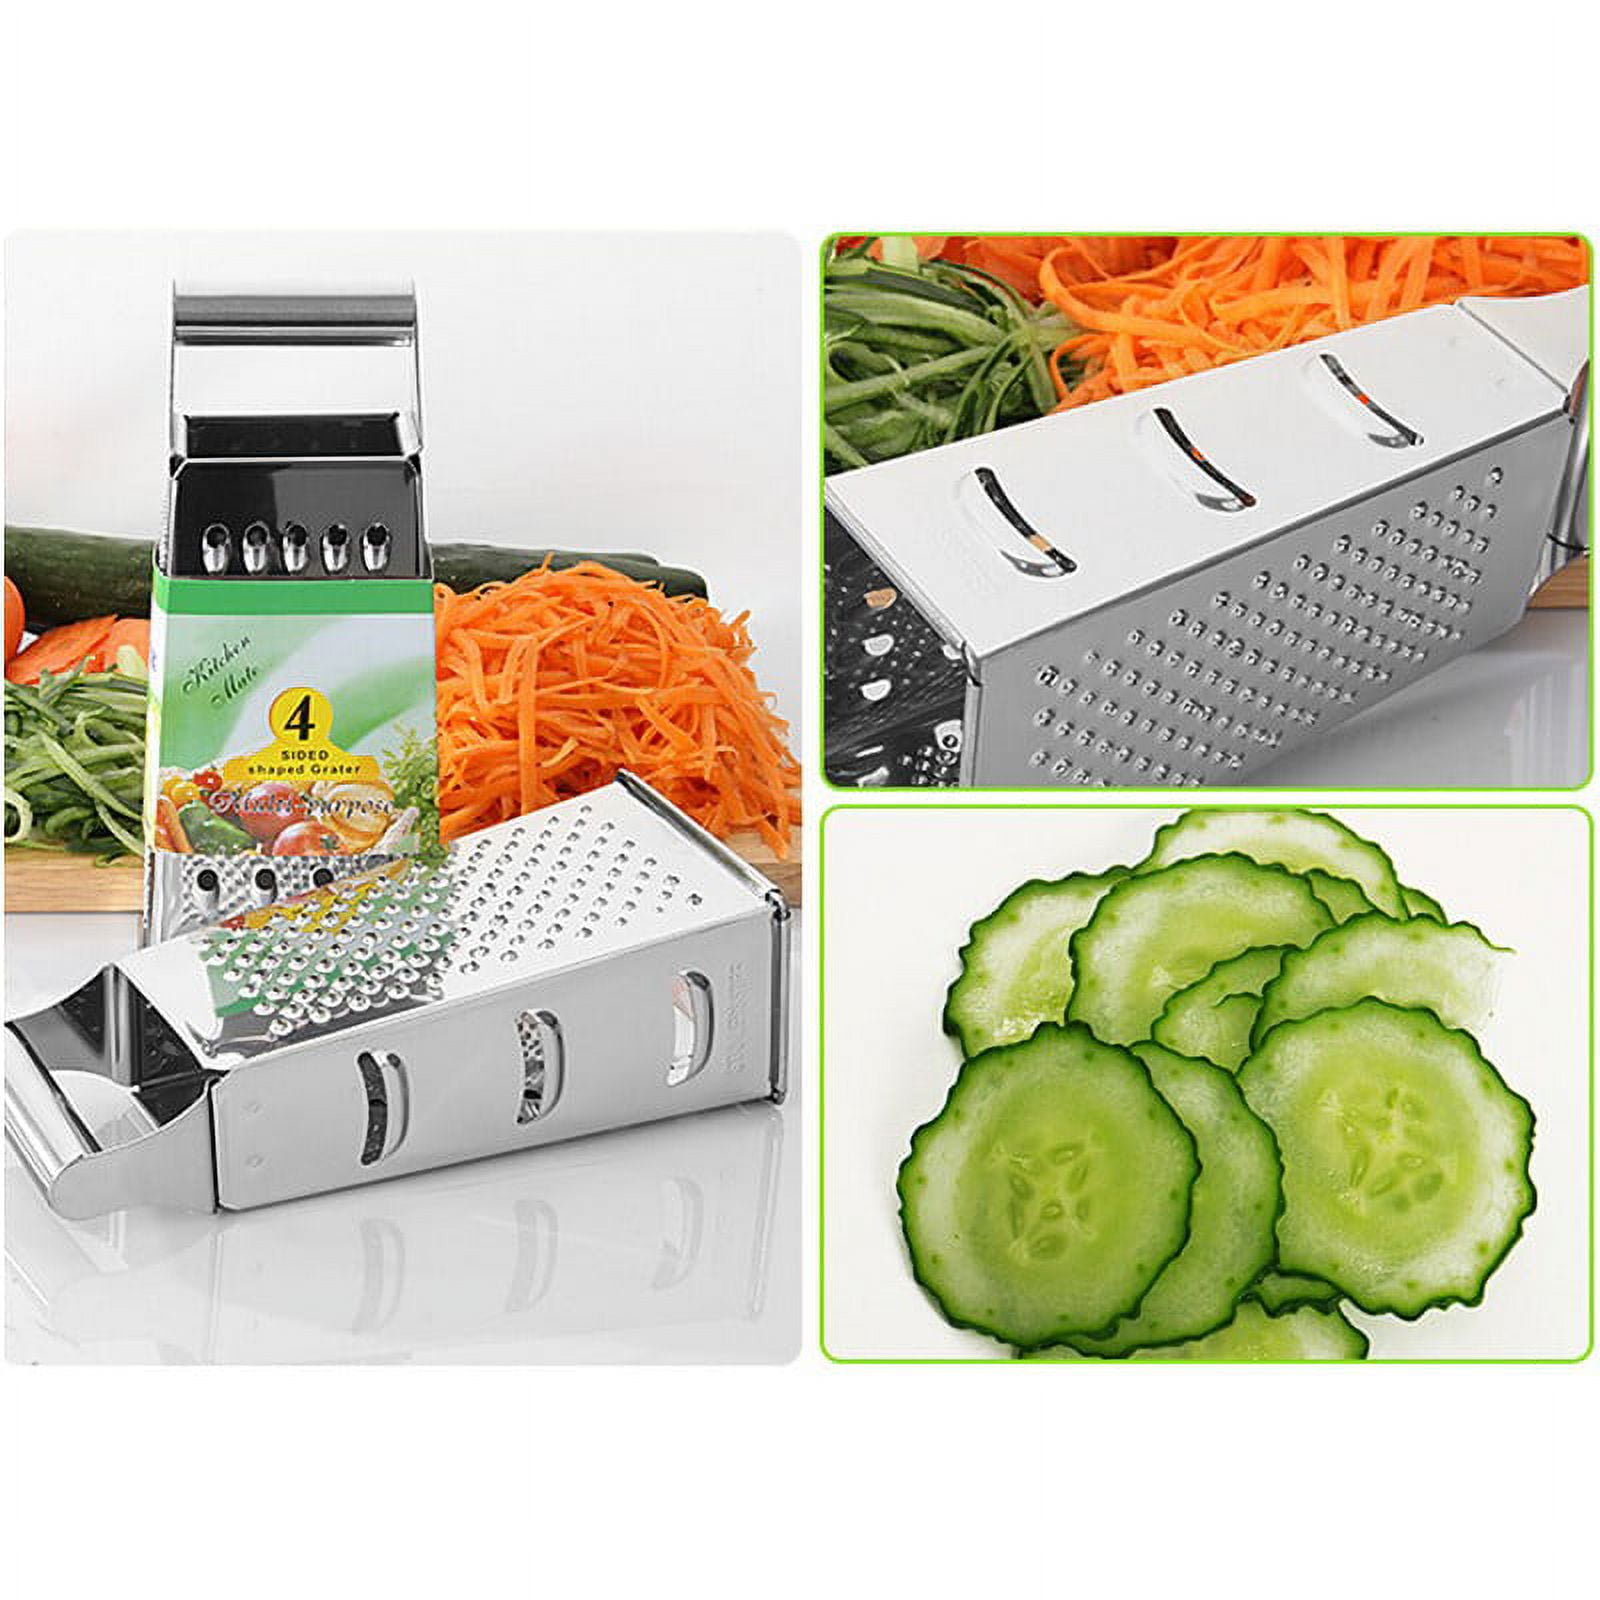 Marco Almond KYA57 4-Sided Stainless Steel Box Grater Food